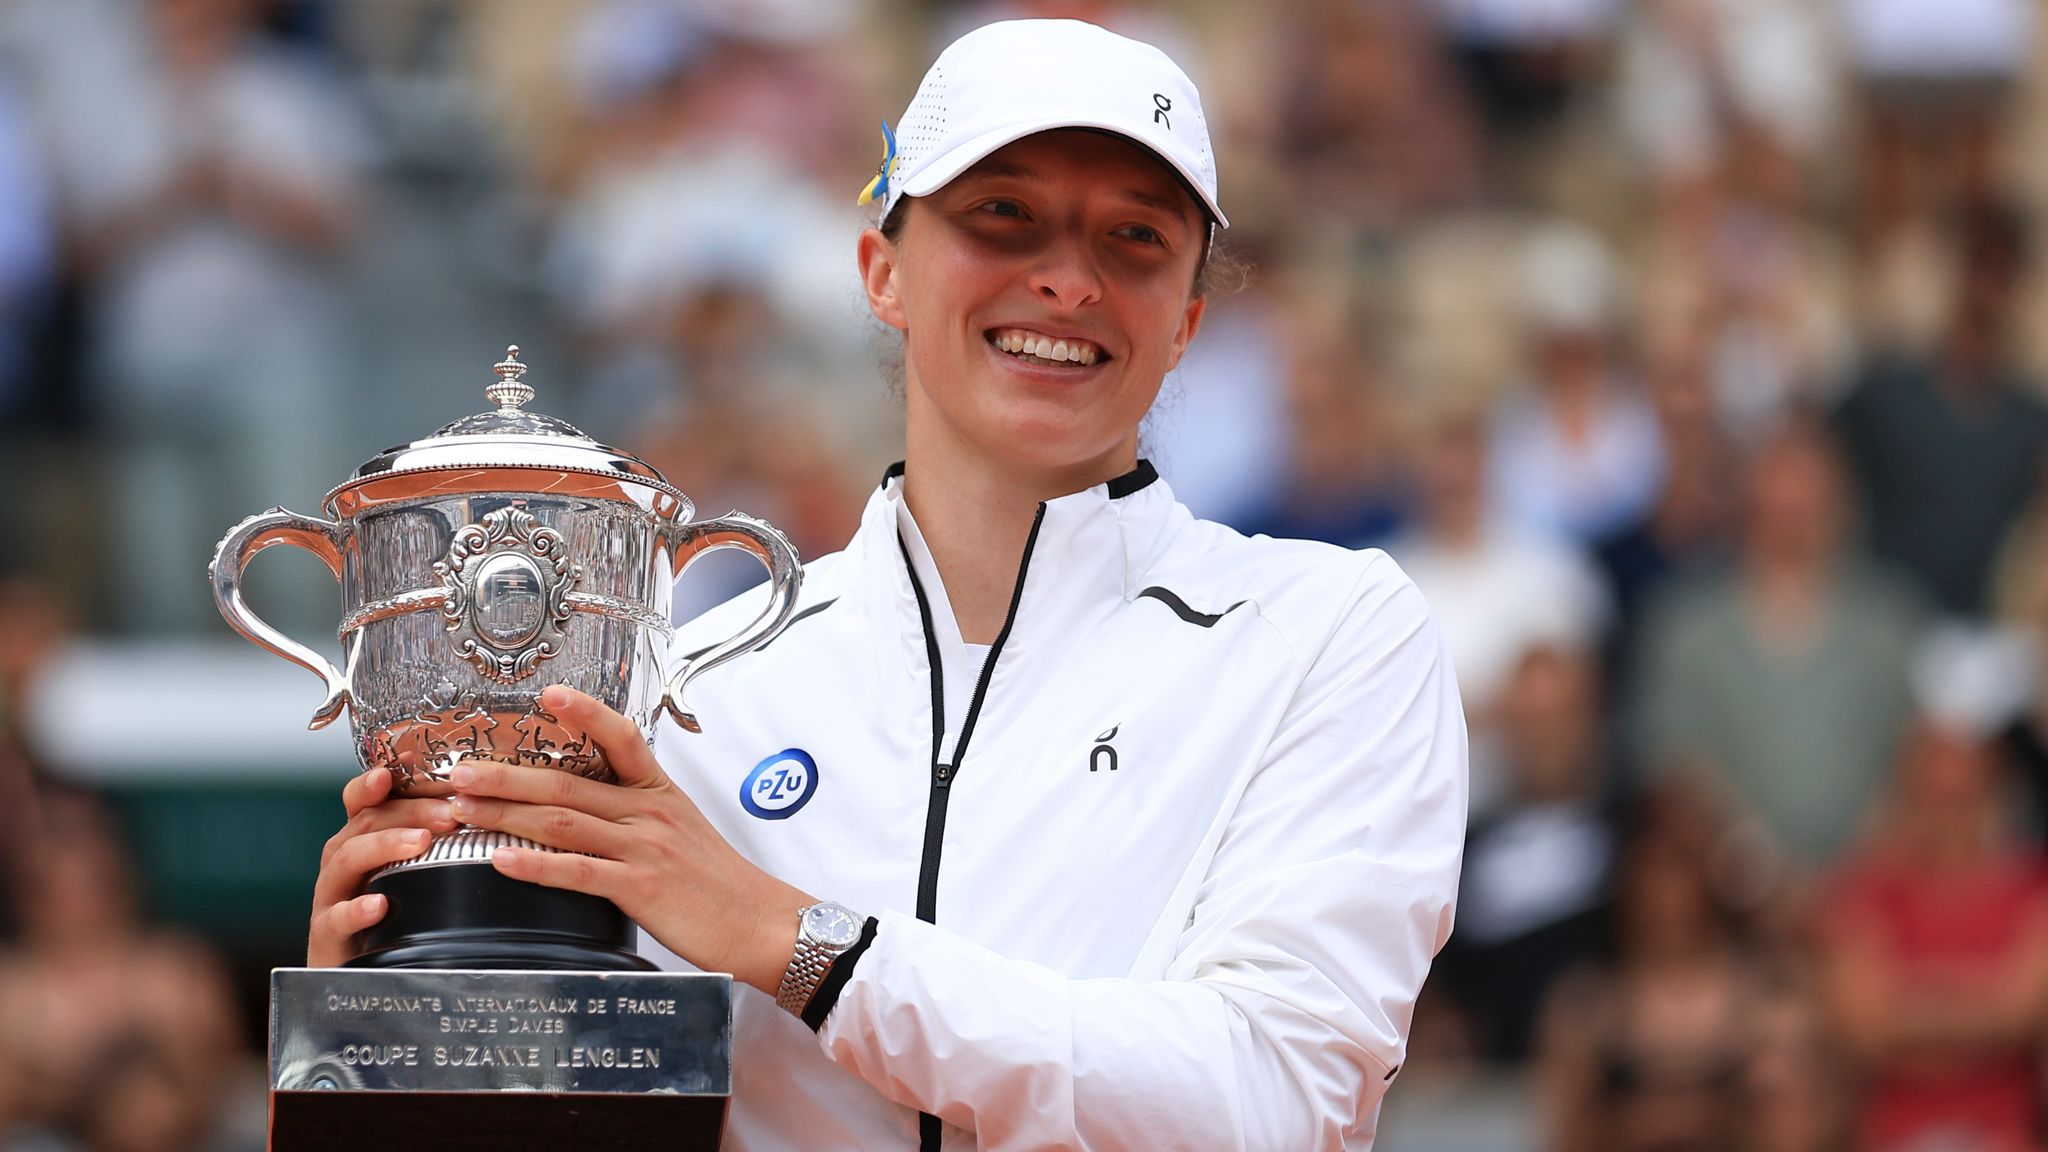 Roland Garros prizes: How much money does the French Open champion get?